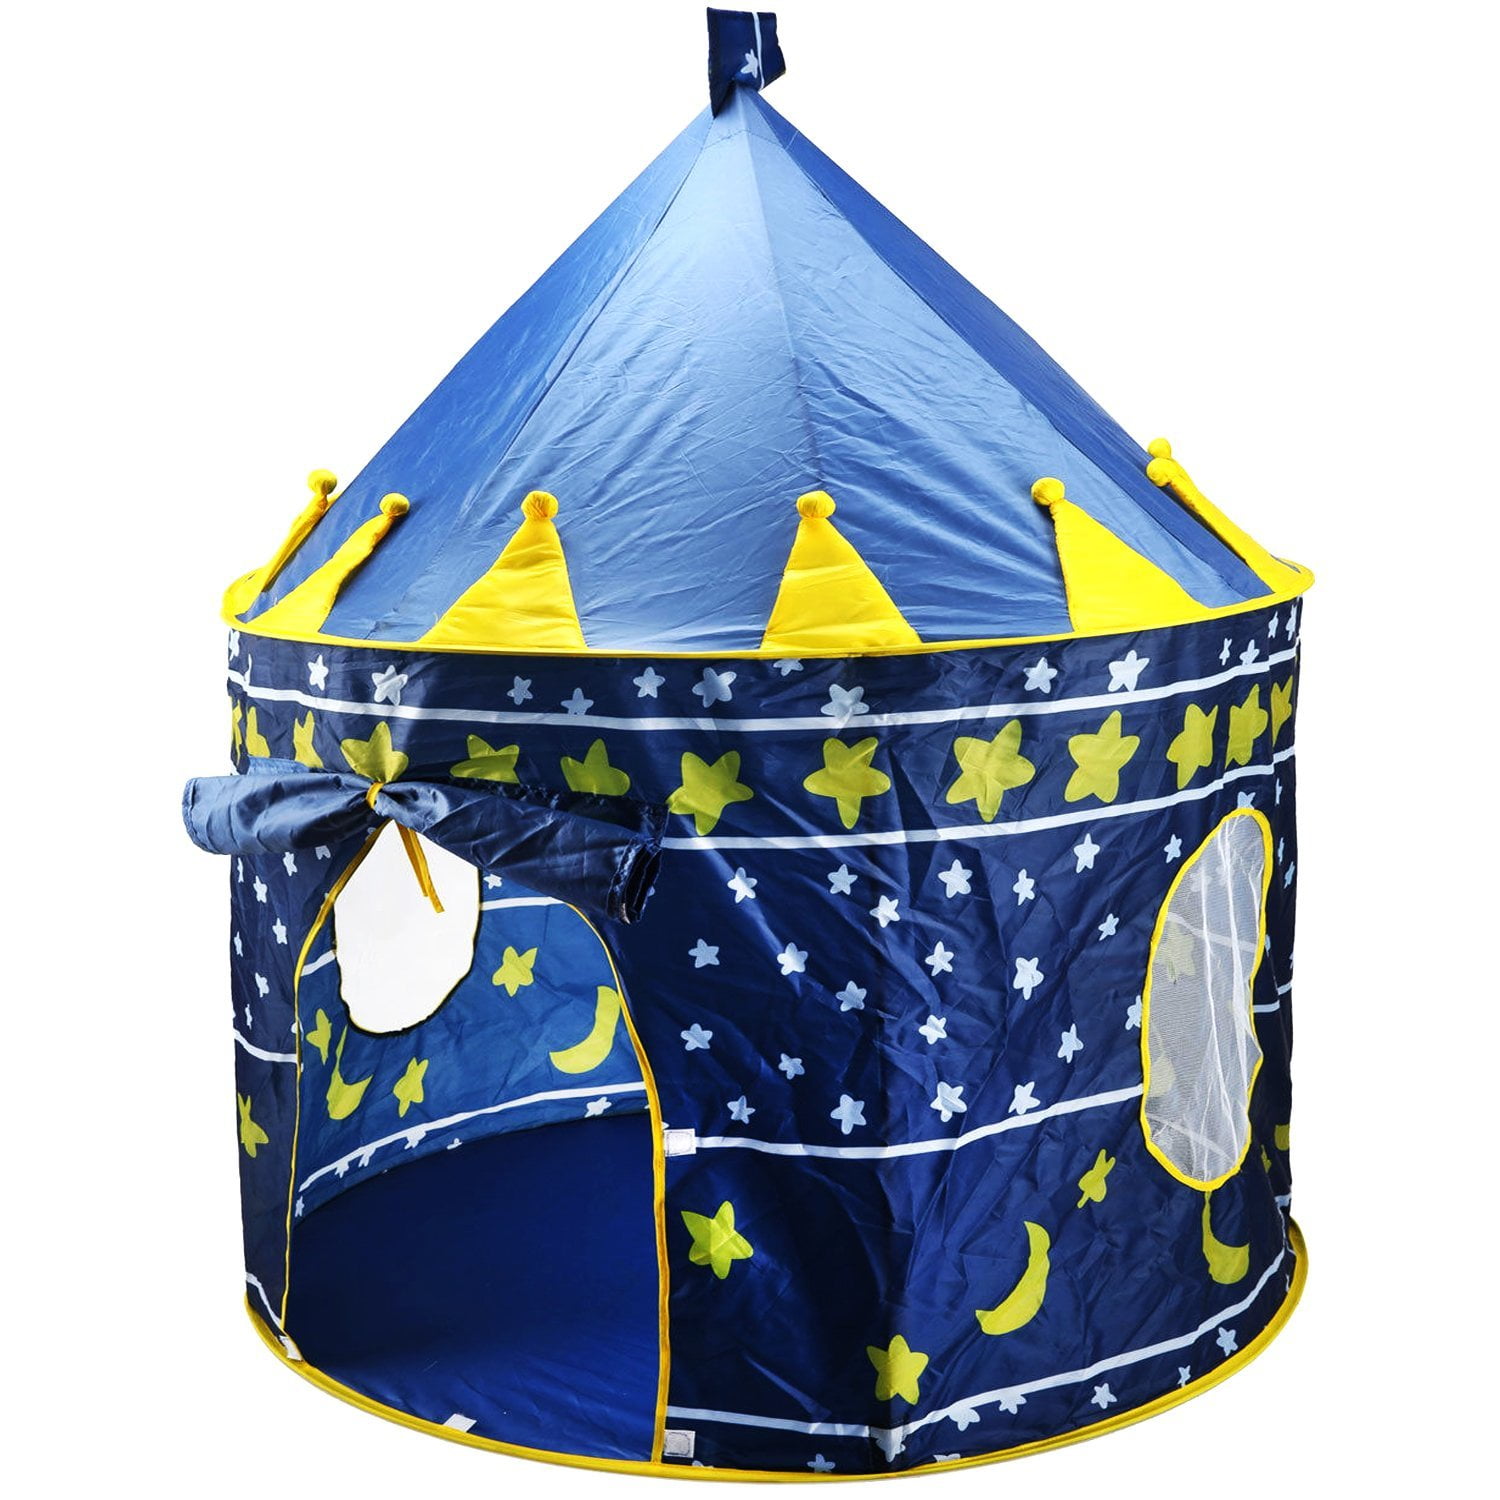 Foldable Kids Play Tent Playhouse Baby Boys Pop Up Car Tents Indoor Outdoor Toy 